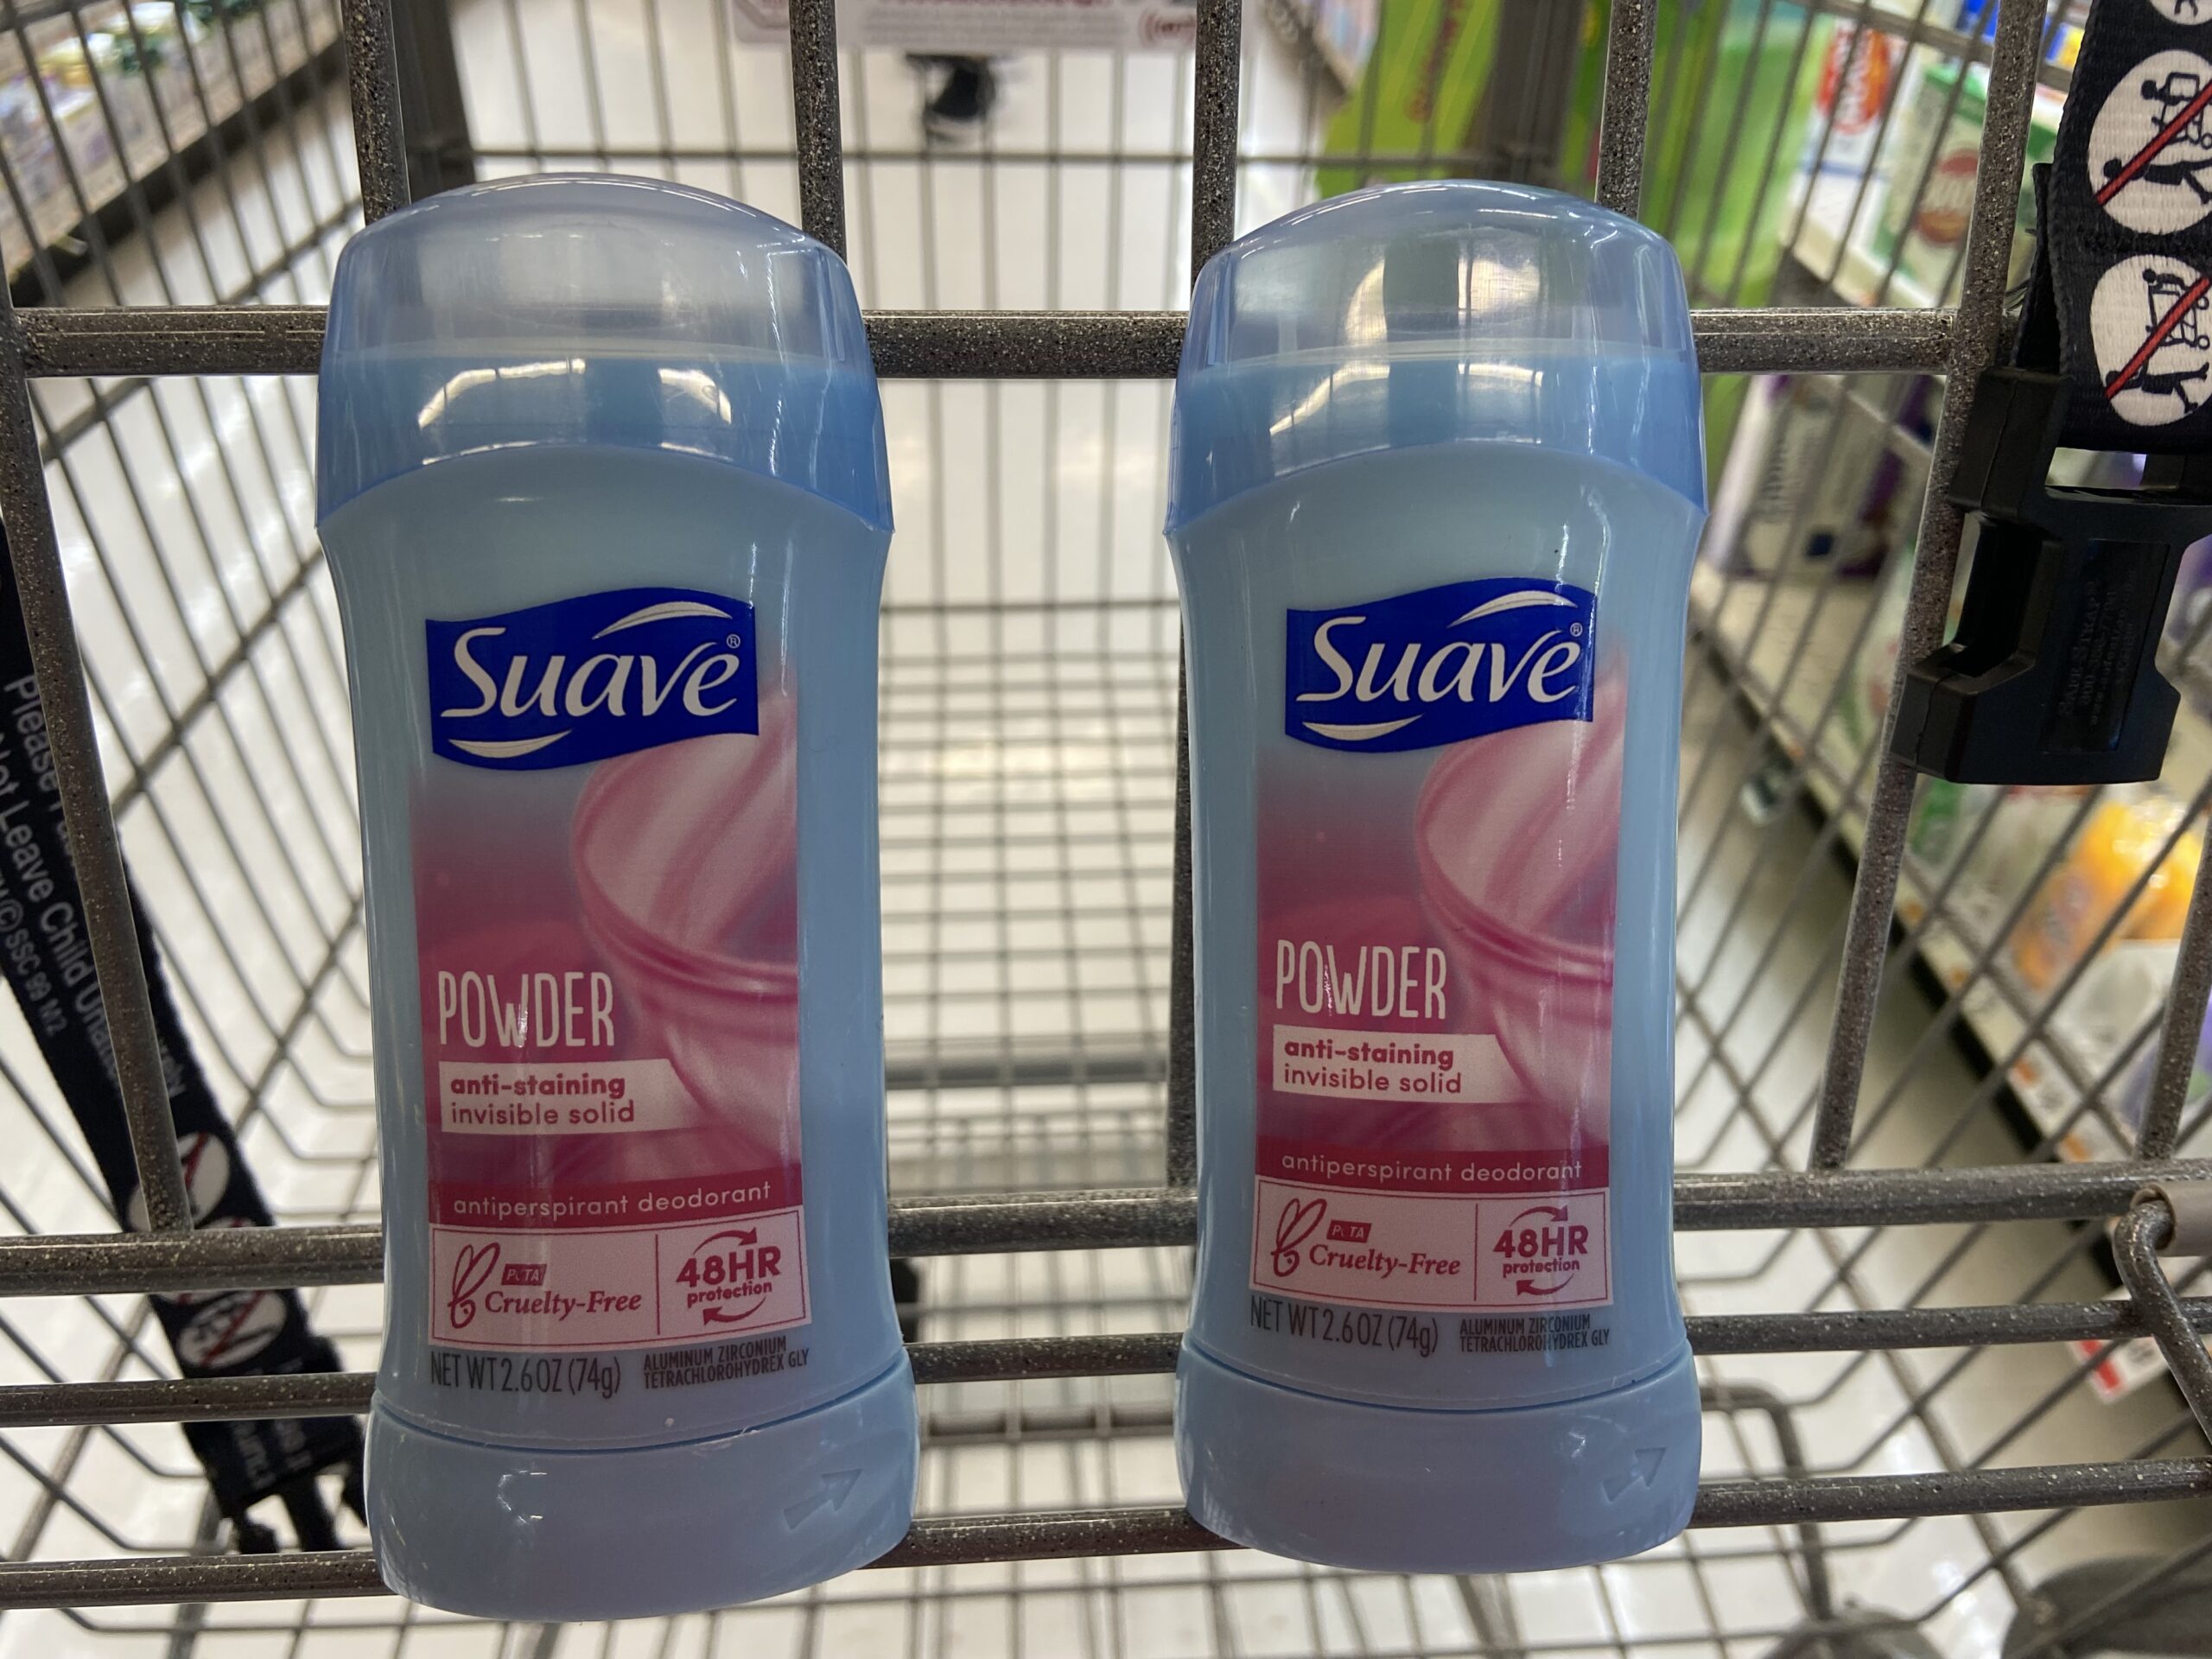 Giant Deal on Suave Or Degree Deodorants